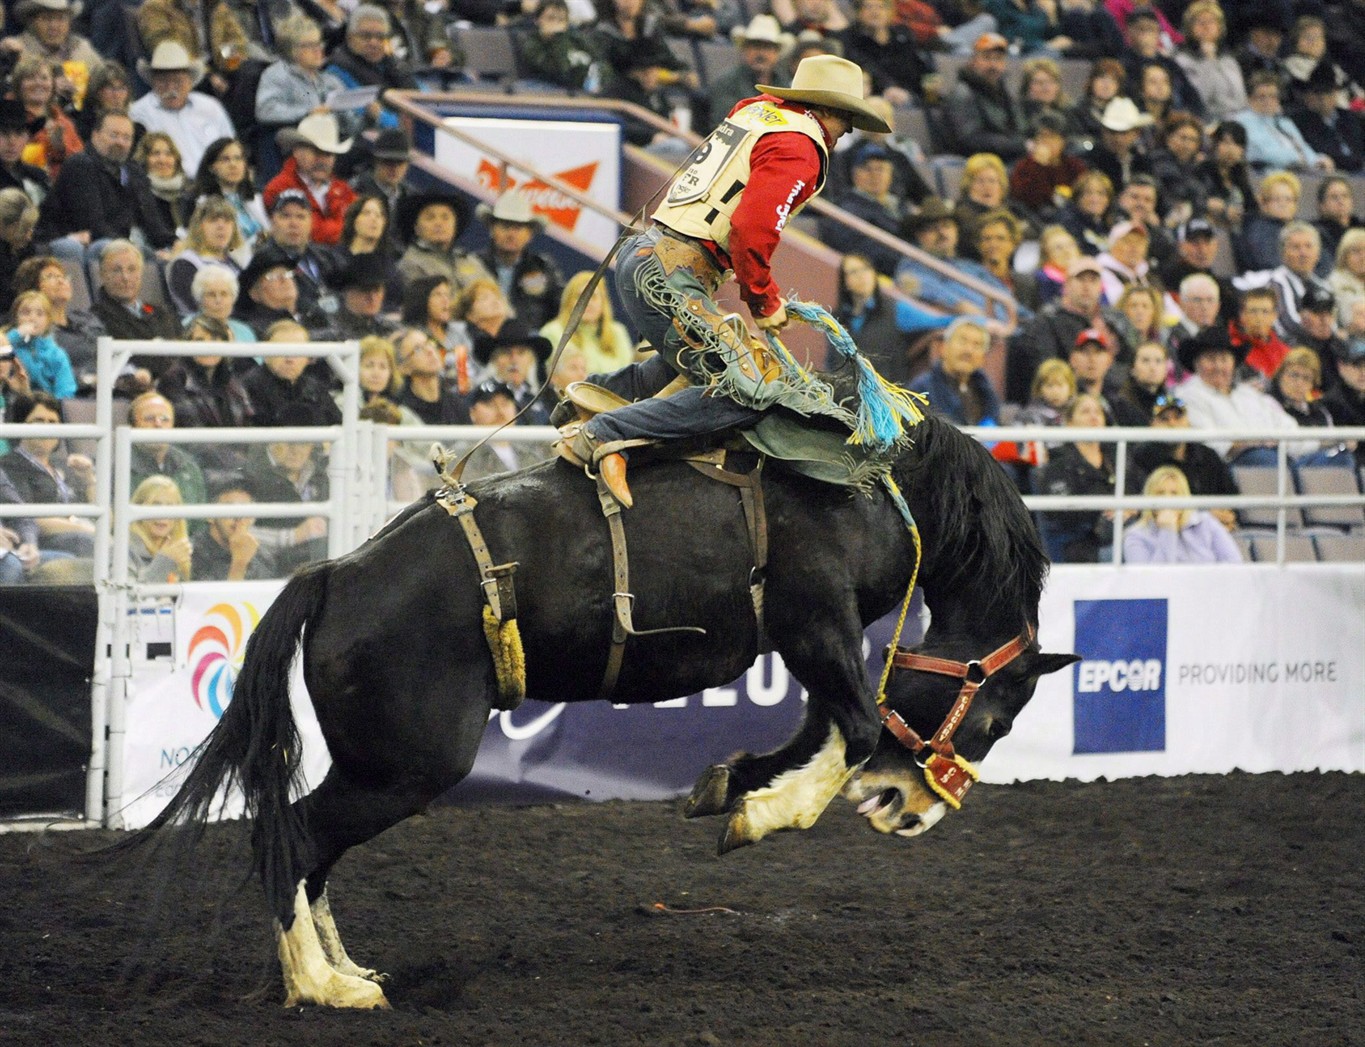 Canadian Finals Rodeo leaves chute in Edmonton, hits trail for new home